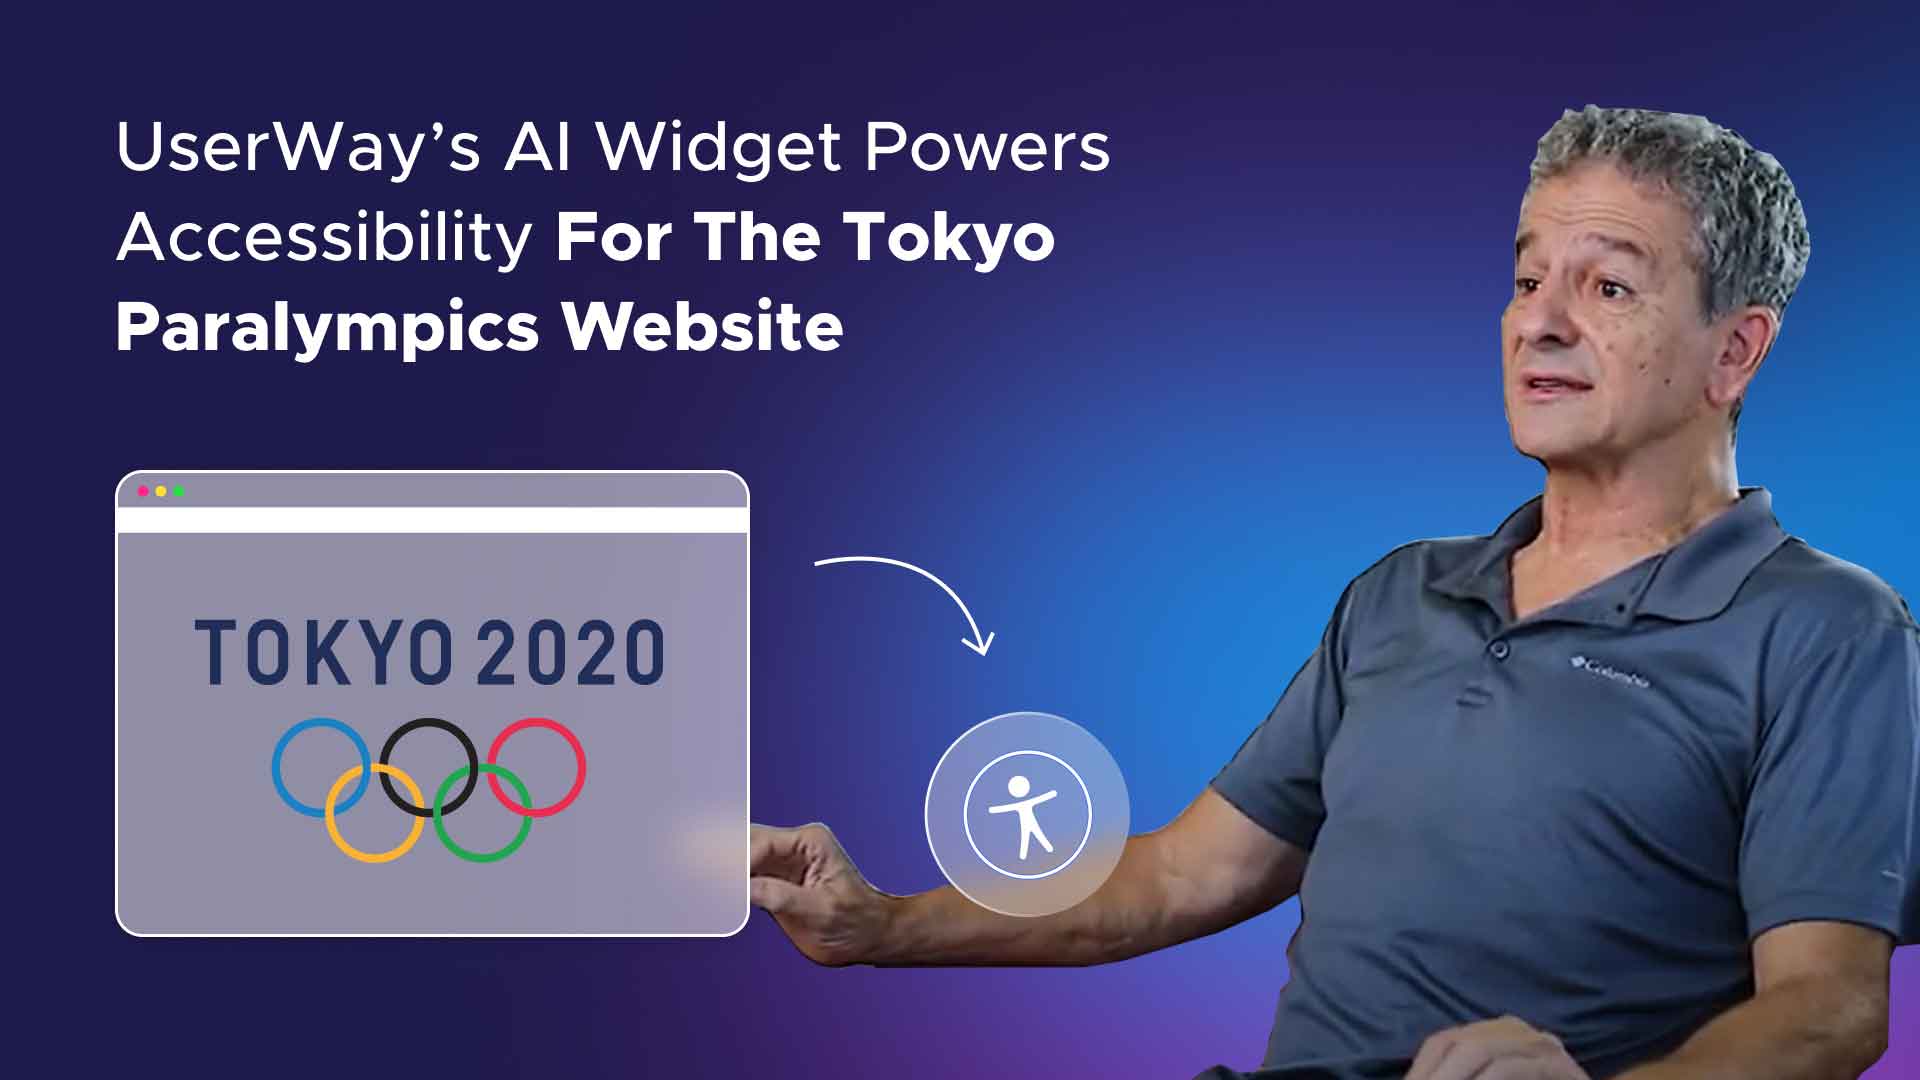 UserWay’s AI Widget Powers Accessibility for the Tokyo Paralympics Website